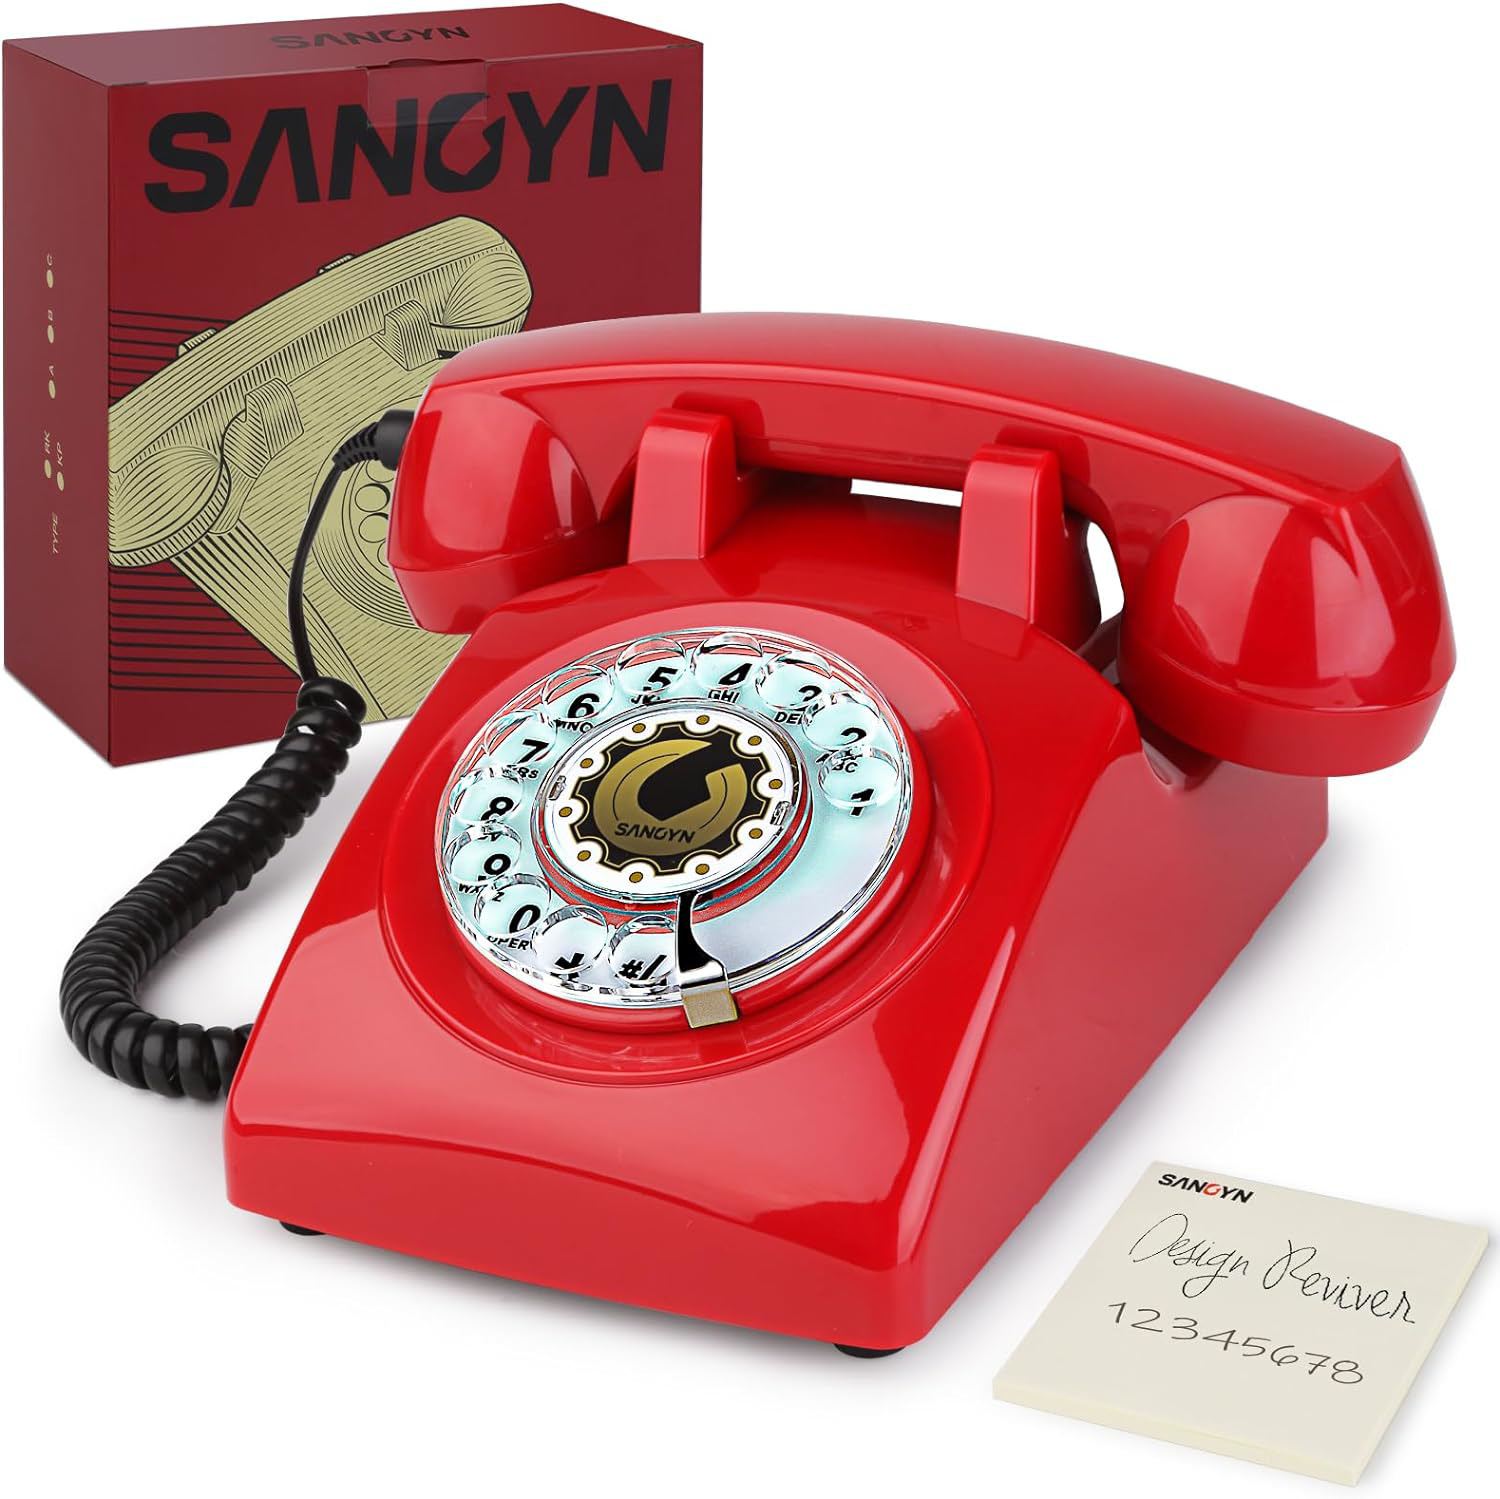 1960s Classic Old Style Rotary Phone Vintage Telephone for Landline with Mechan